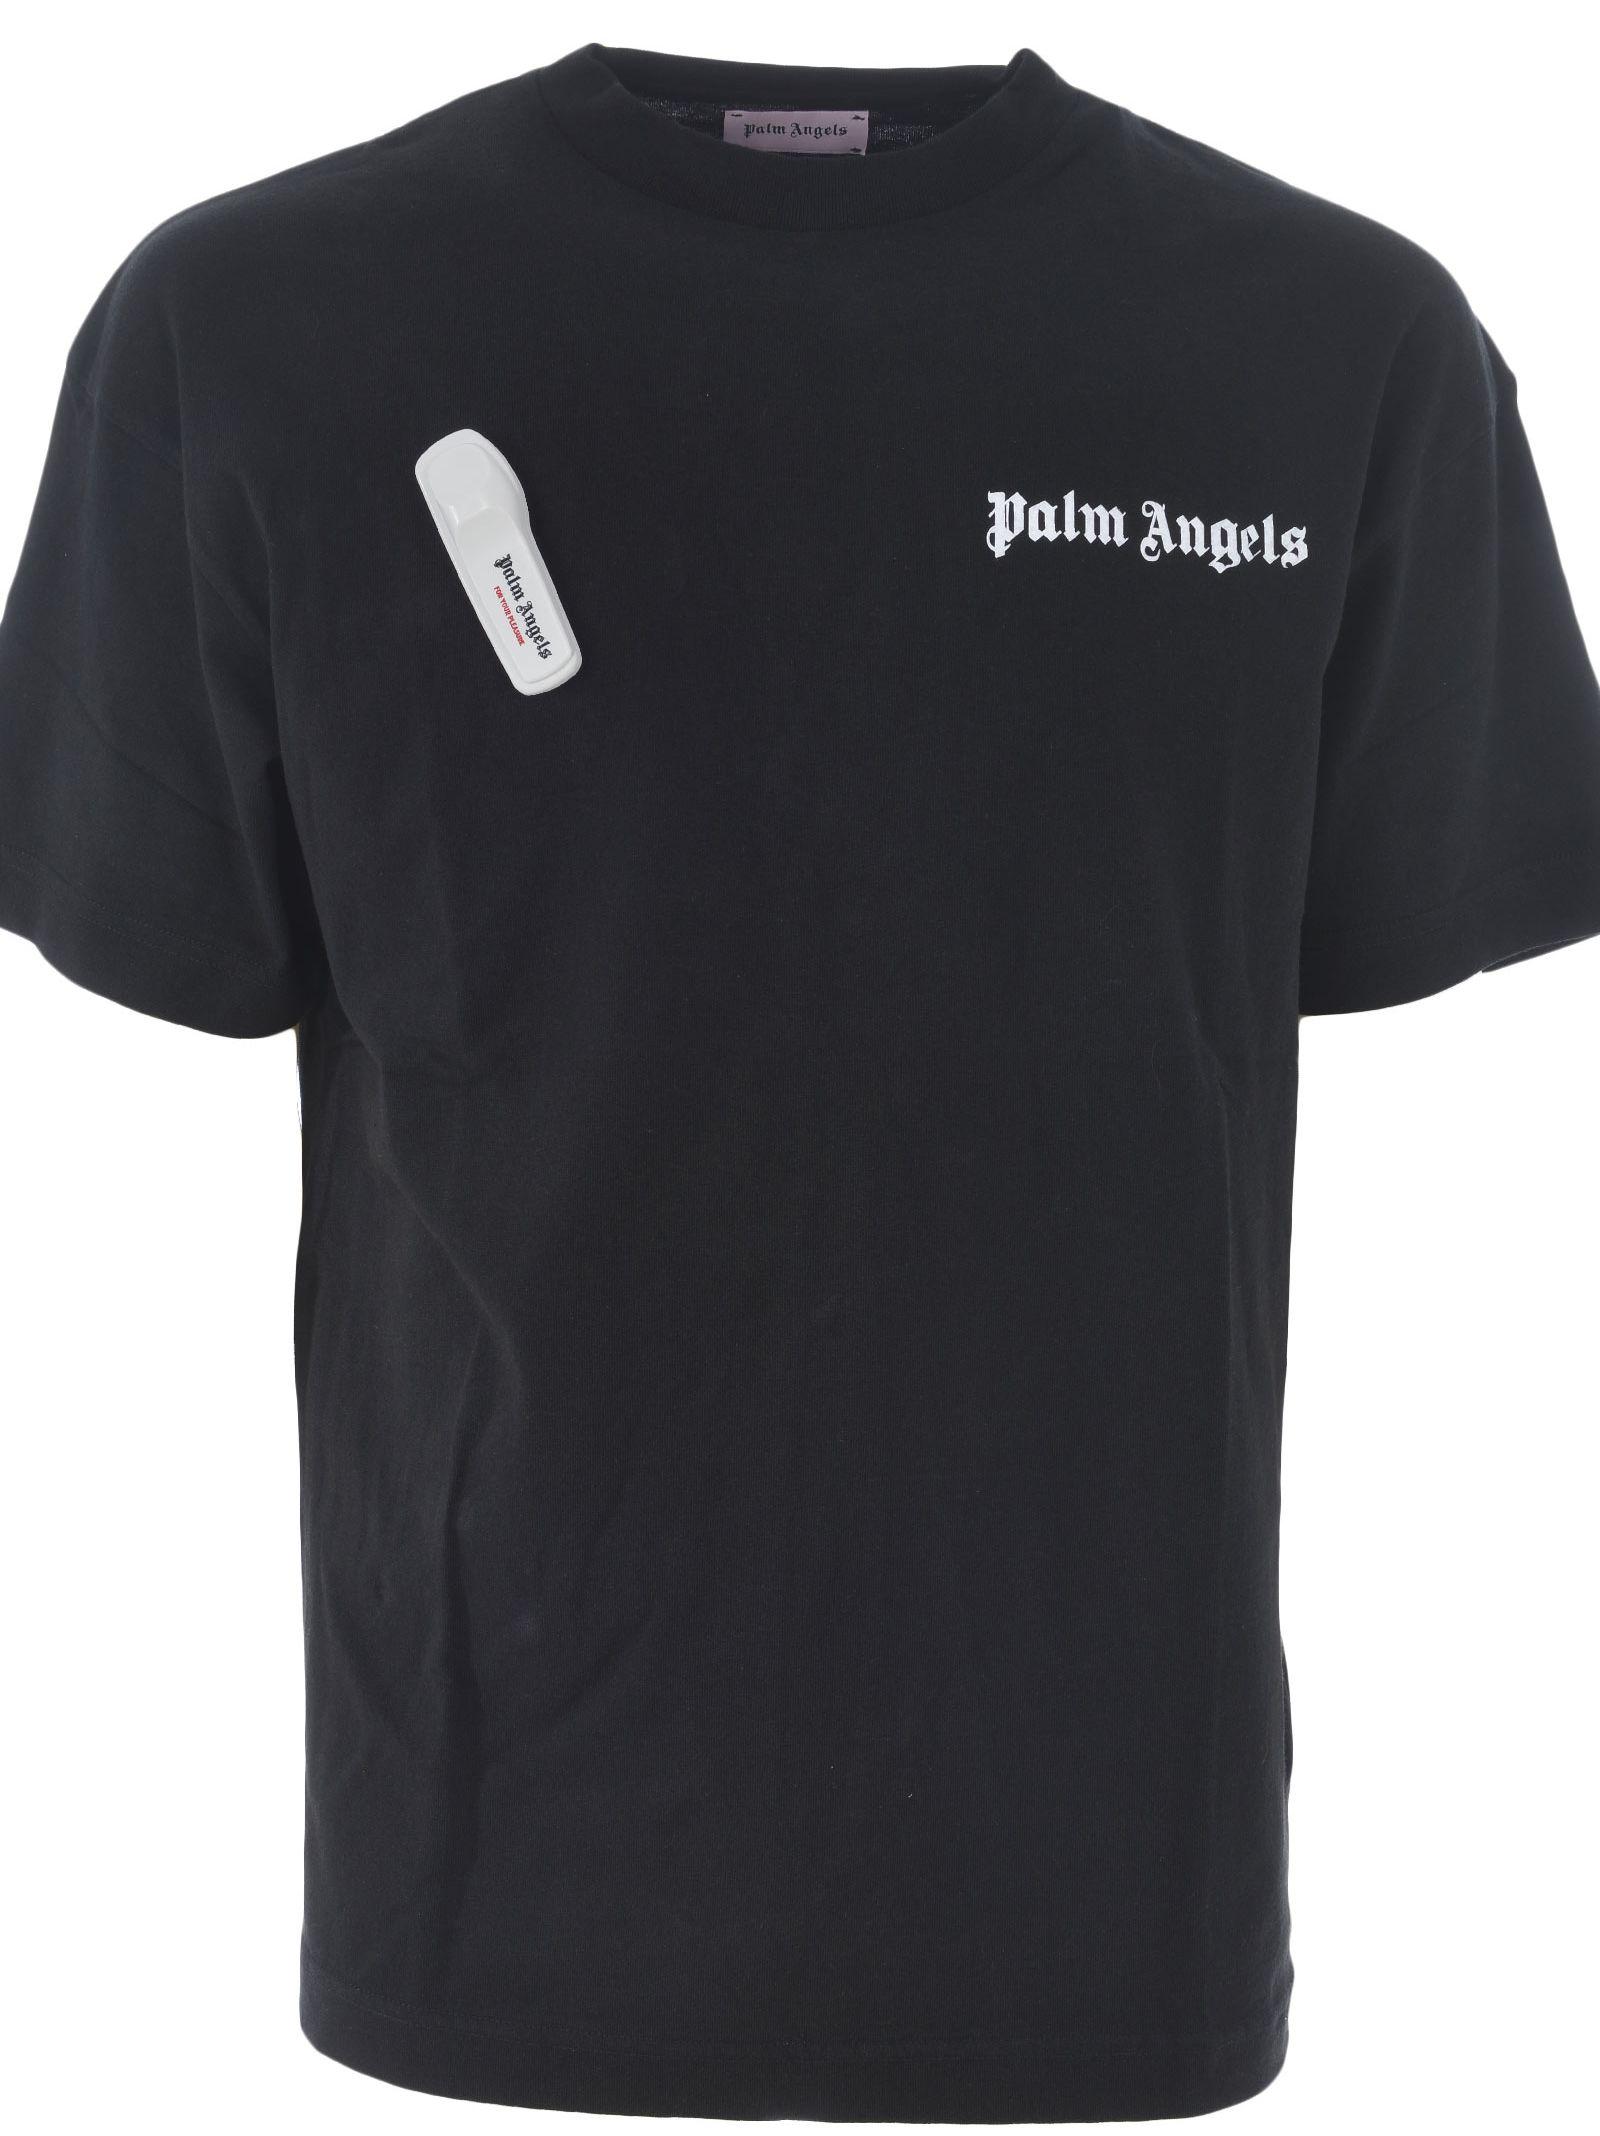 palm angels t shirt with tag